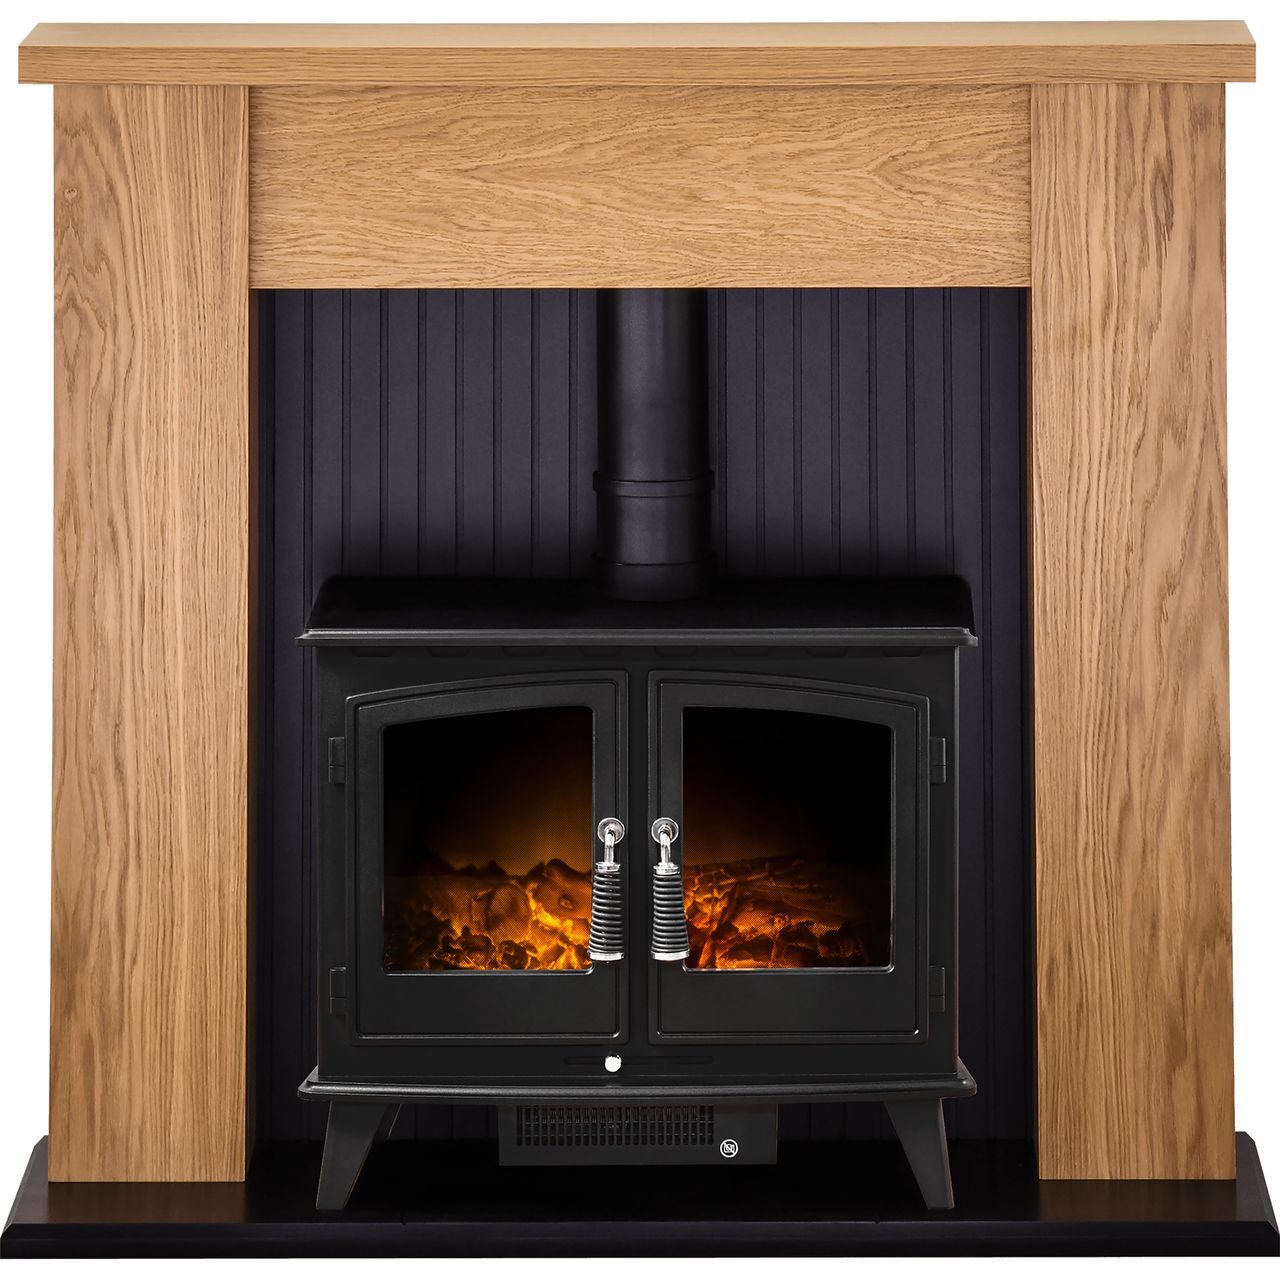 Adam Fires New England Suite with Woodhouse Electric Fire 21878 Log Effect Suite And Surround Fireplace Review